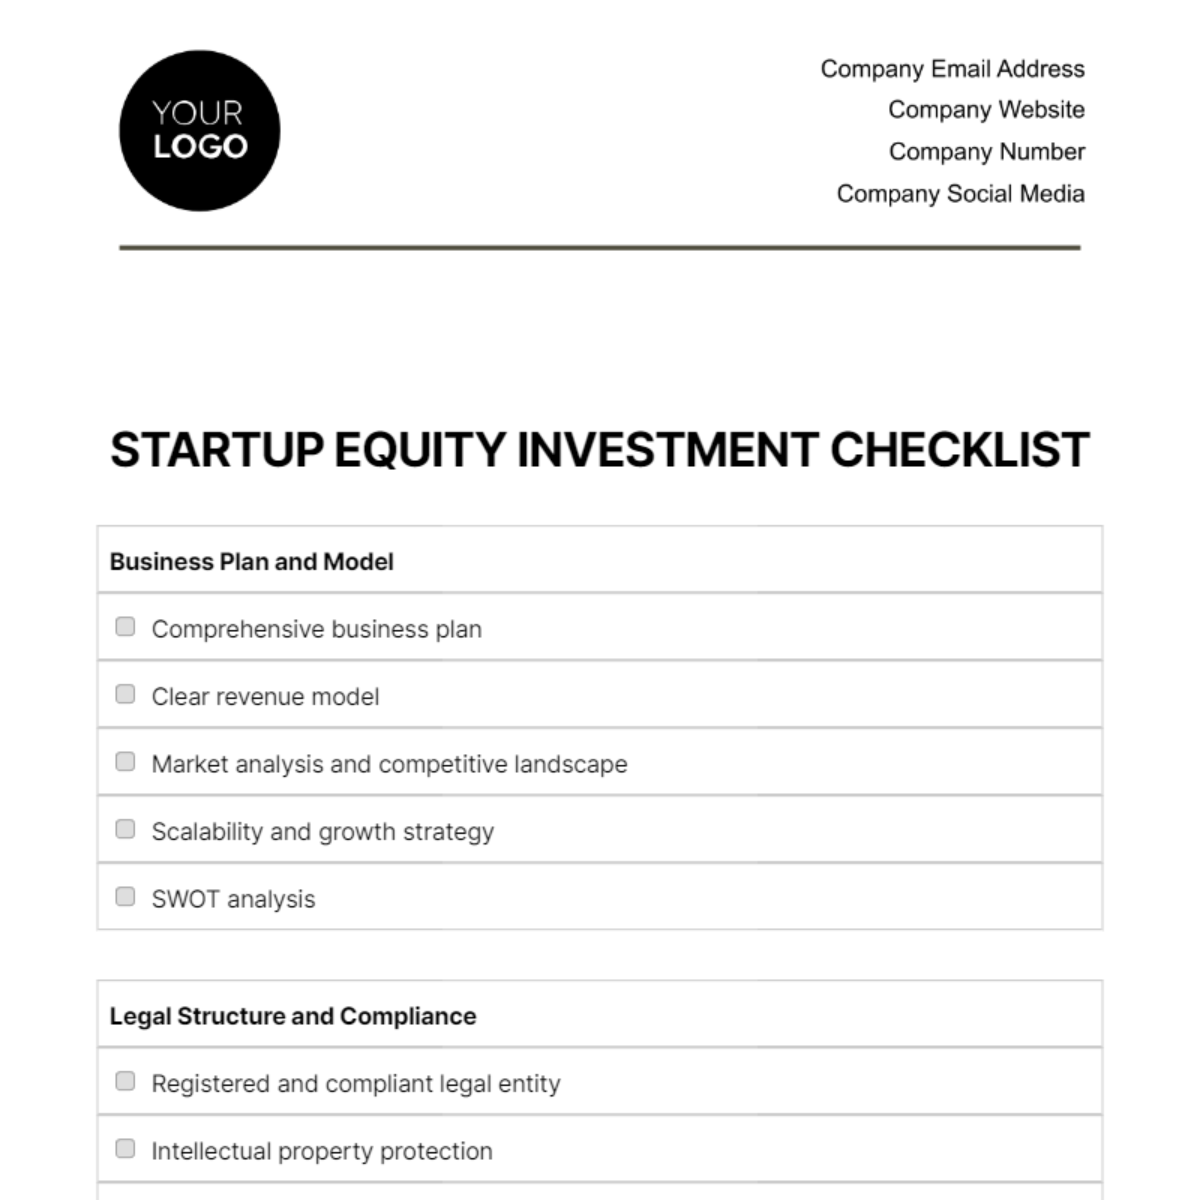 Startup Equity Investment Checklist Template